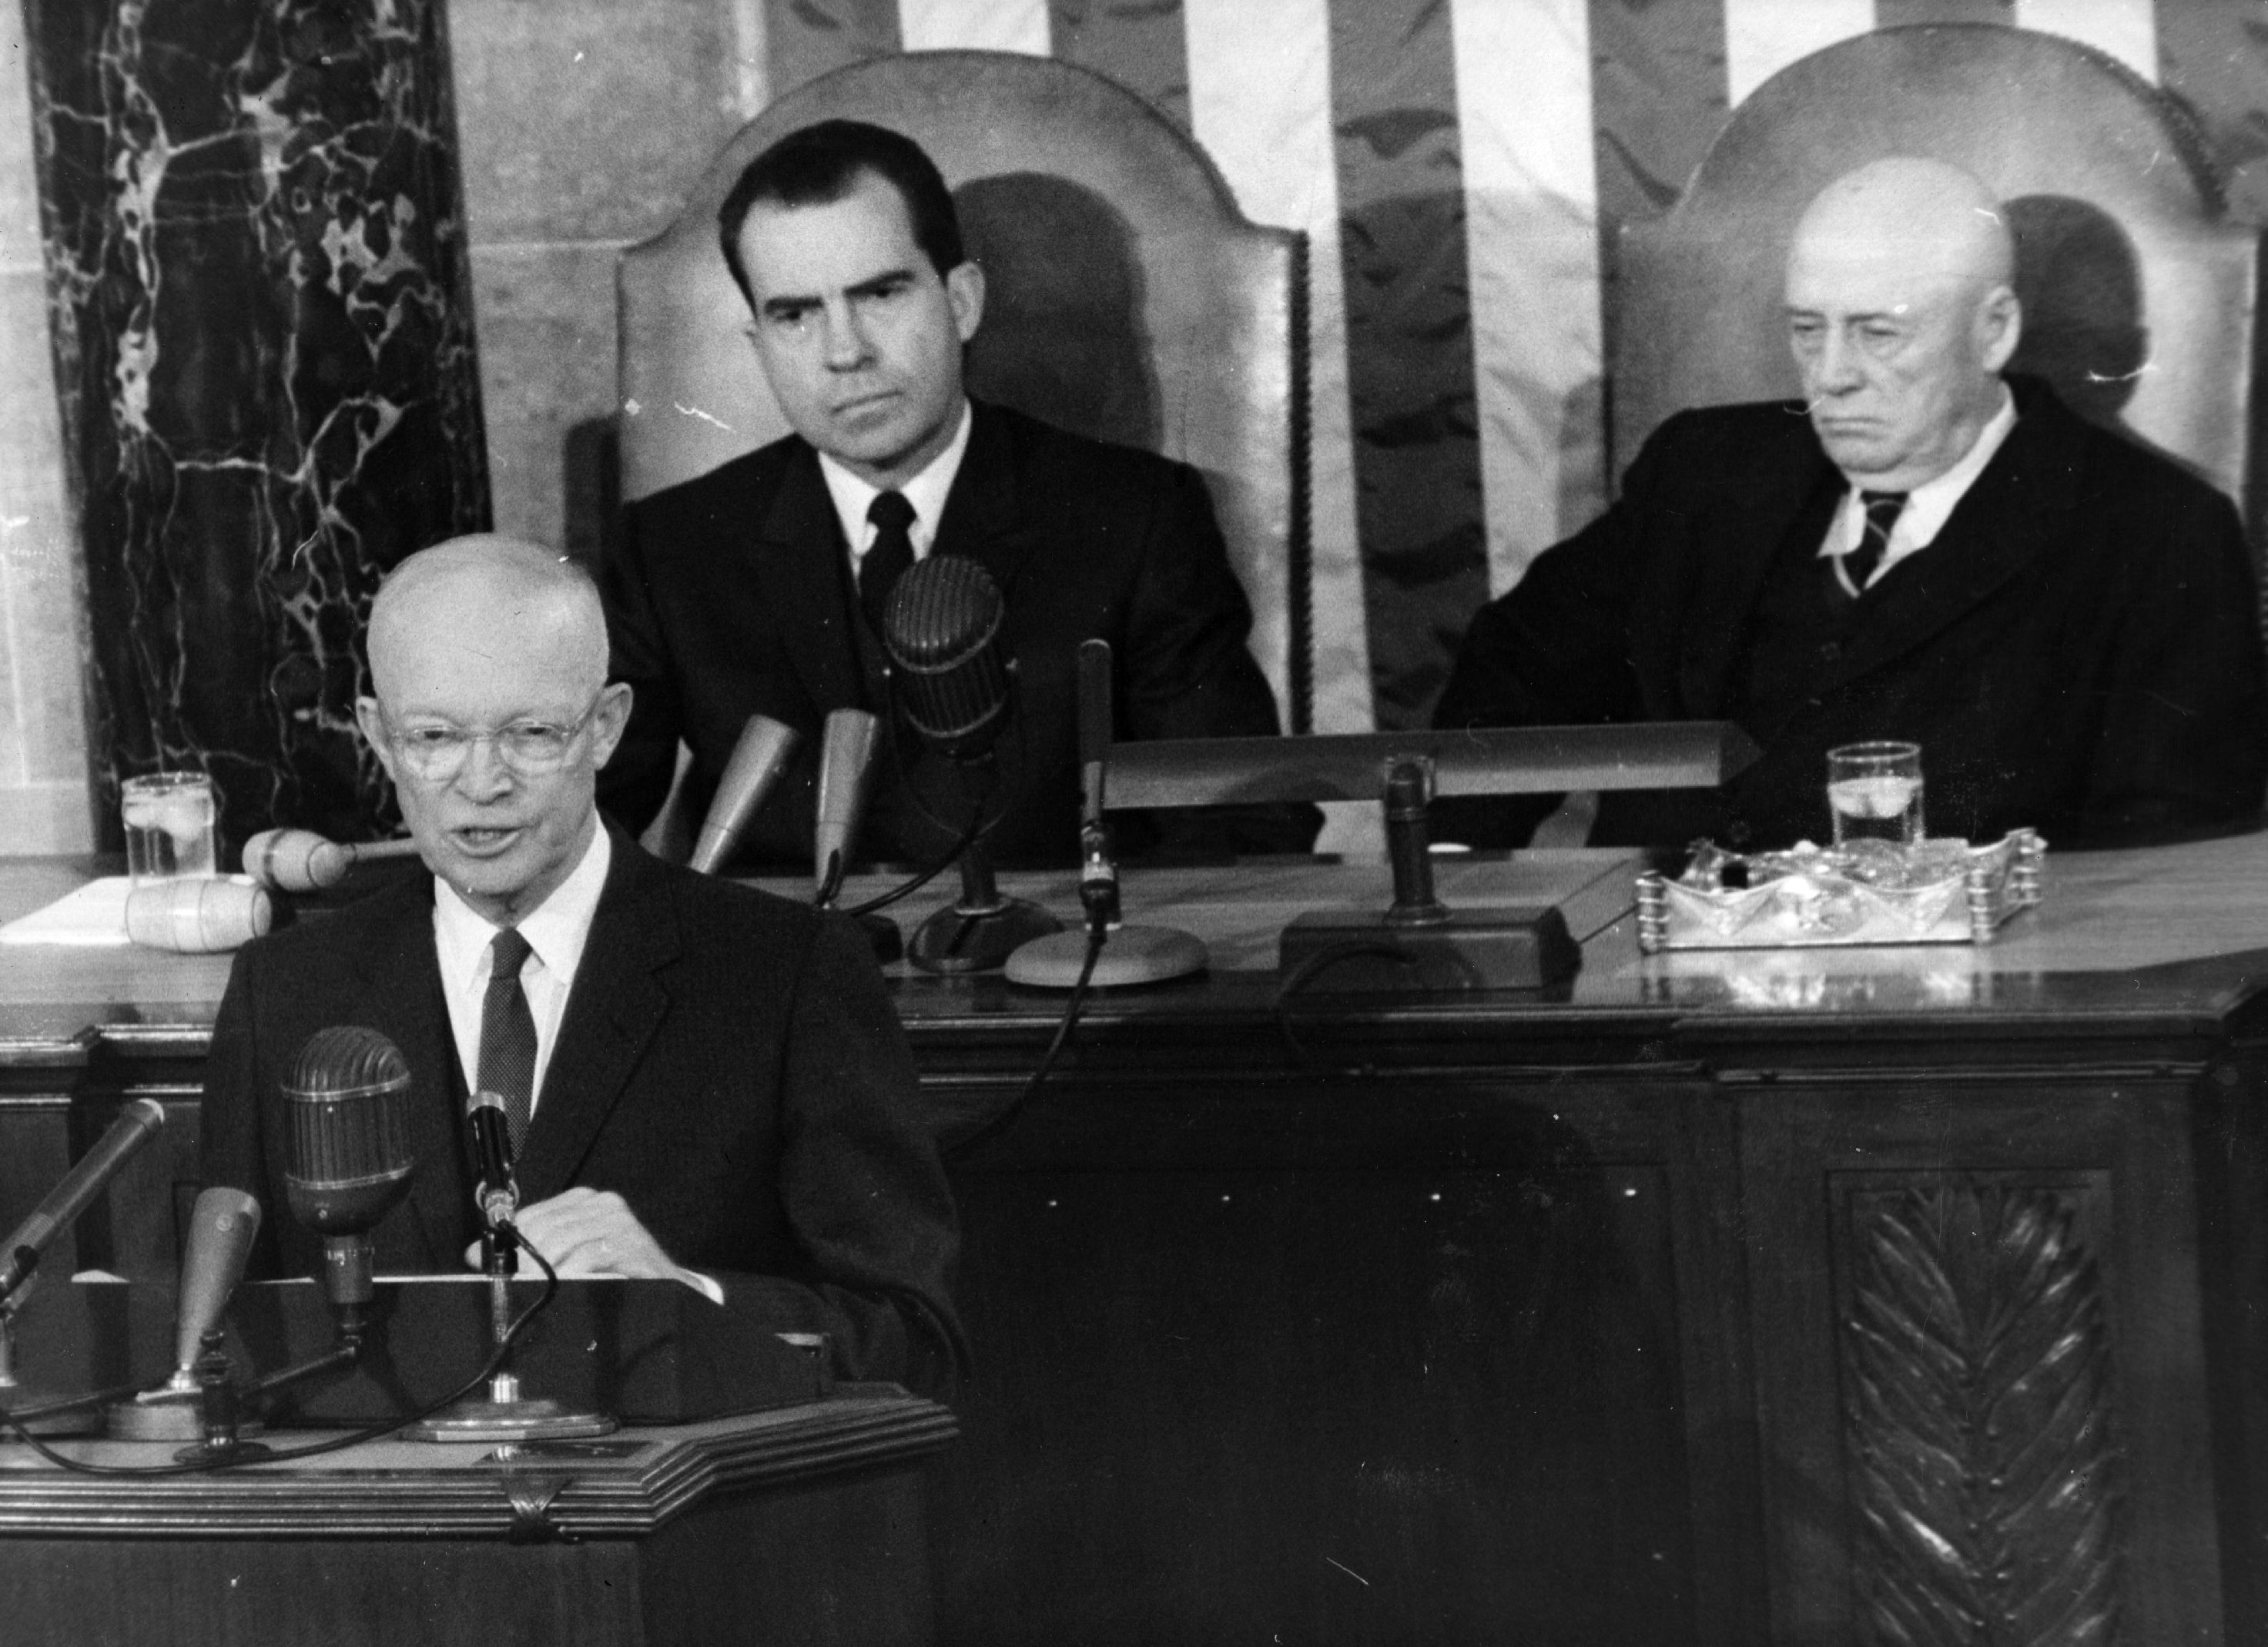 Dwight D Eisenhower's State of the Union with Richard Nixon in the background